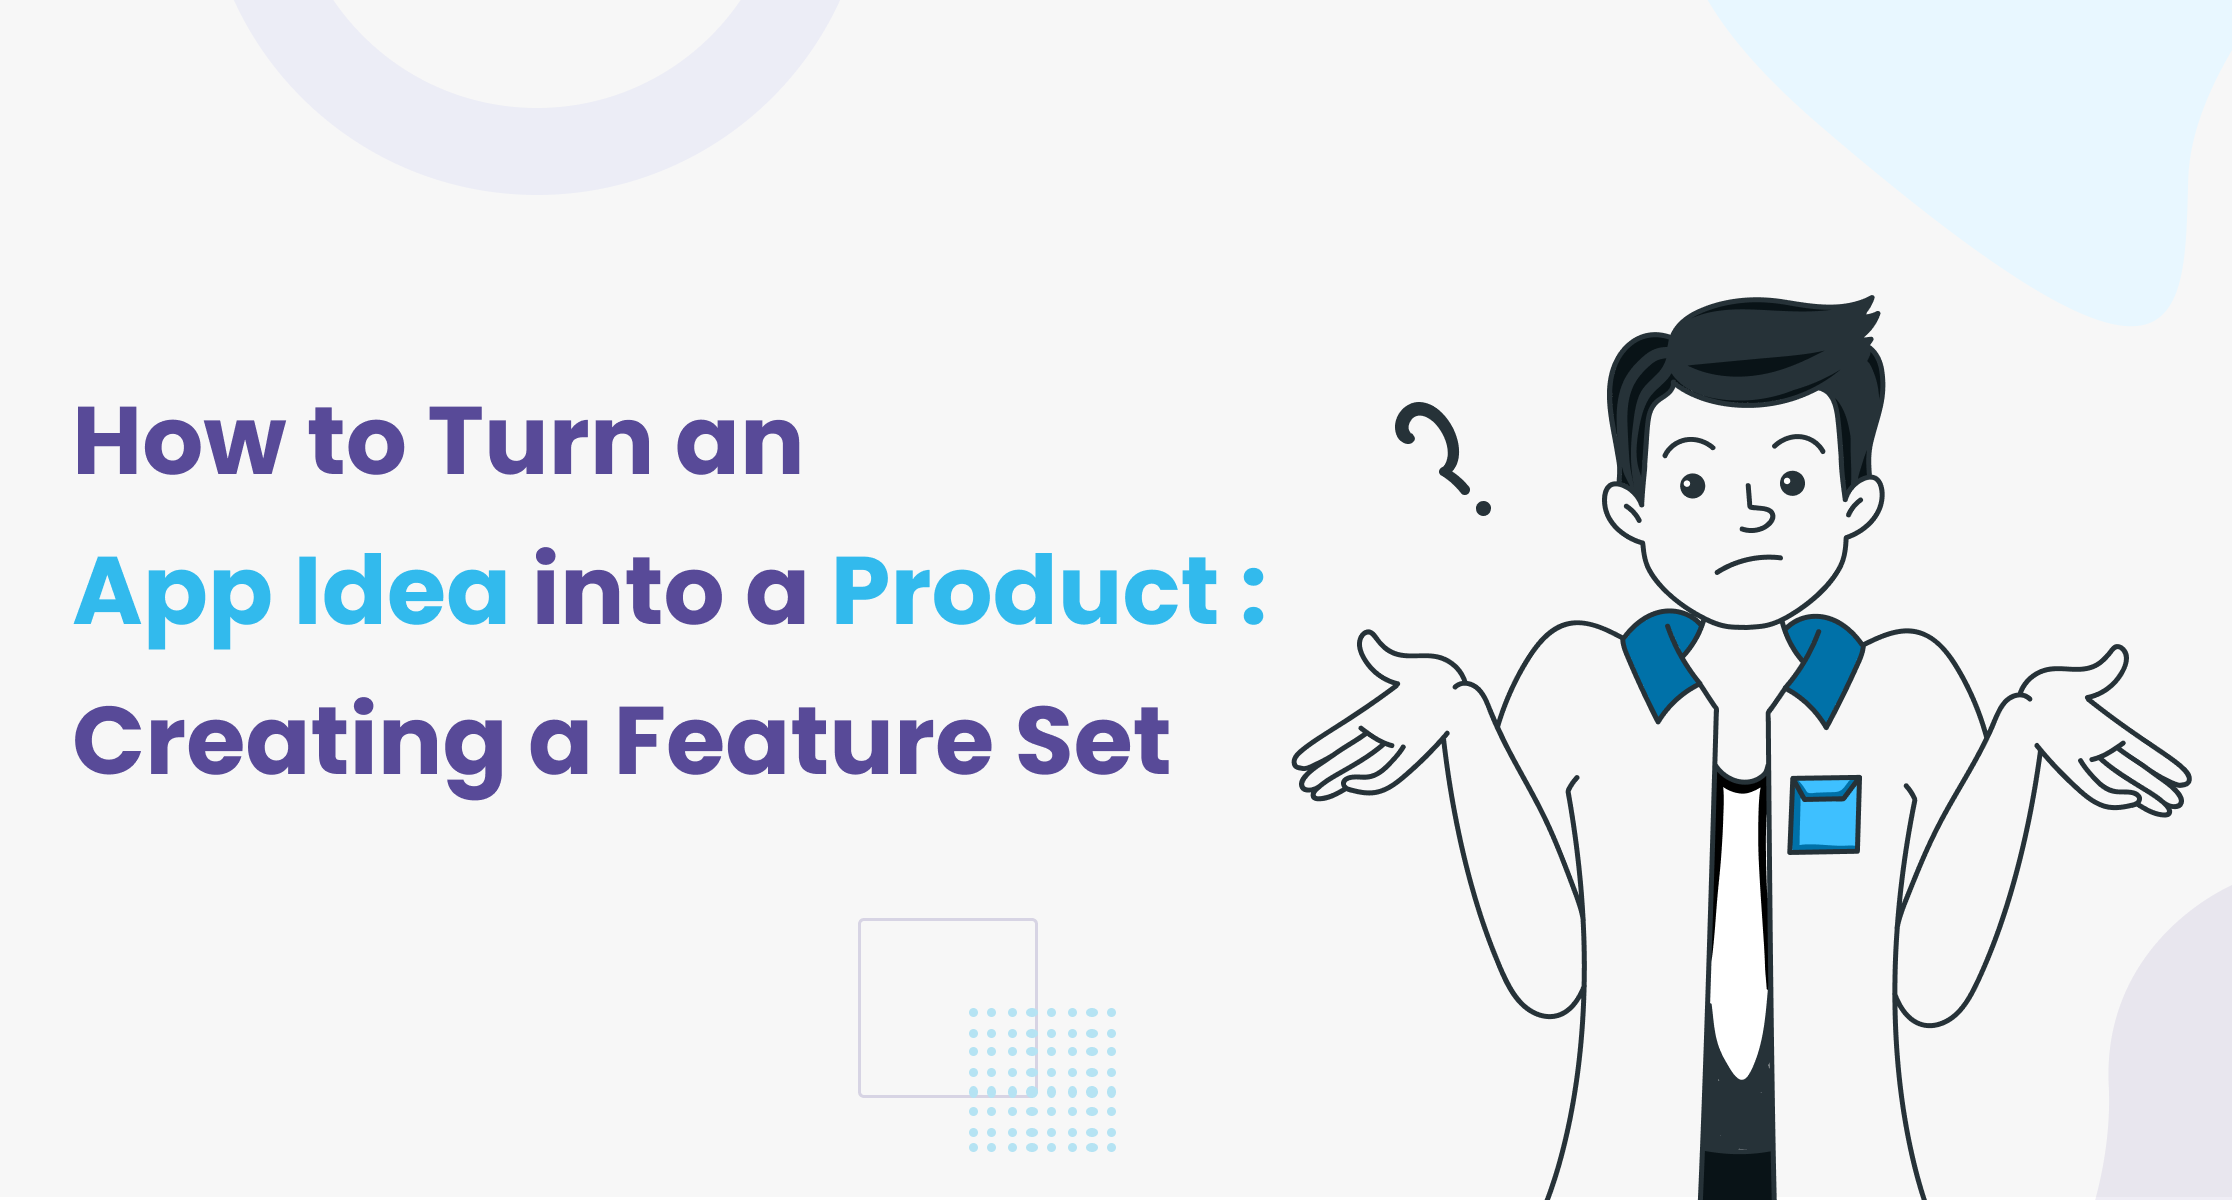 How to Turn an App Idea into a Product: Creating a Feature Set